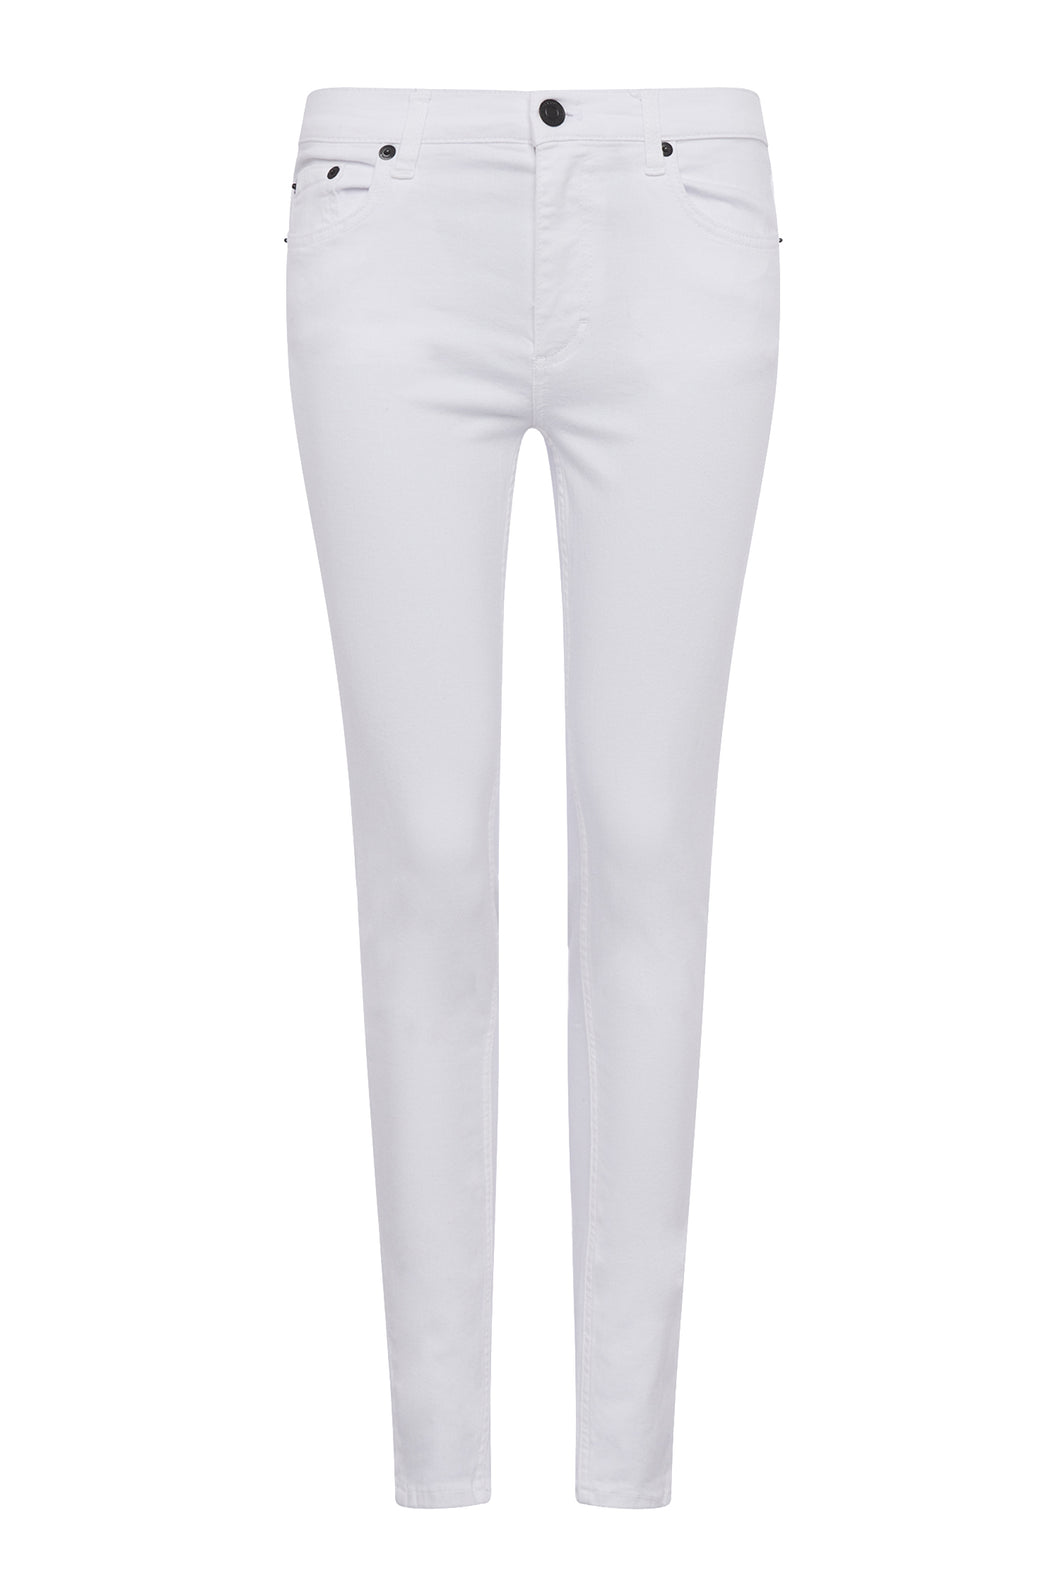 French Connection - Rebound Recycled Skinny Jeans in White